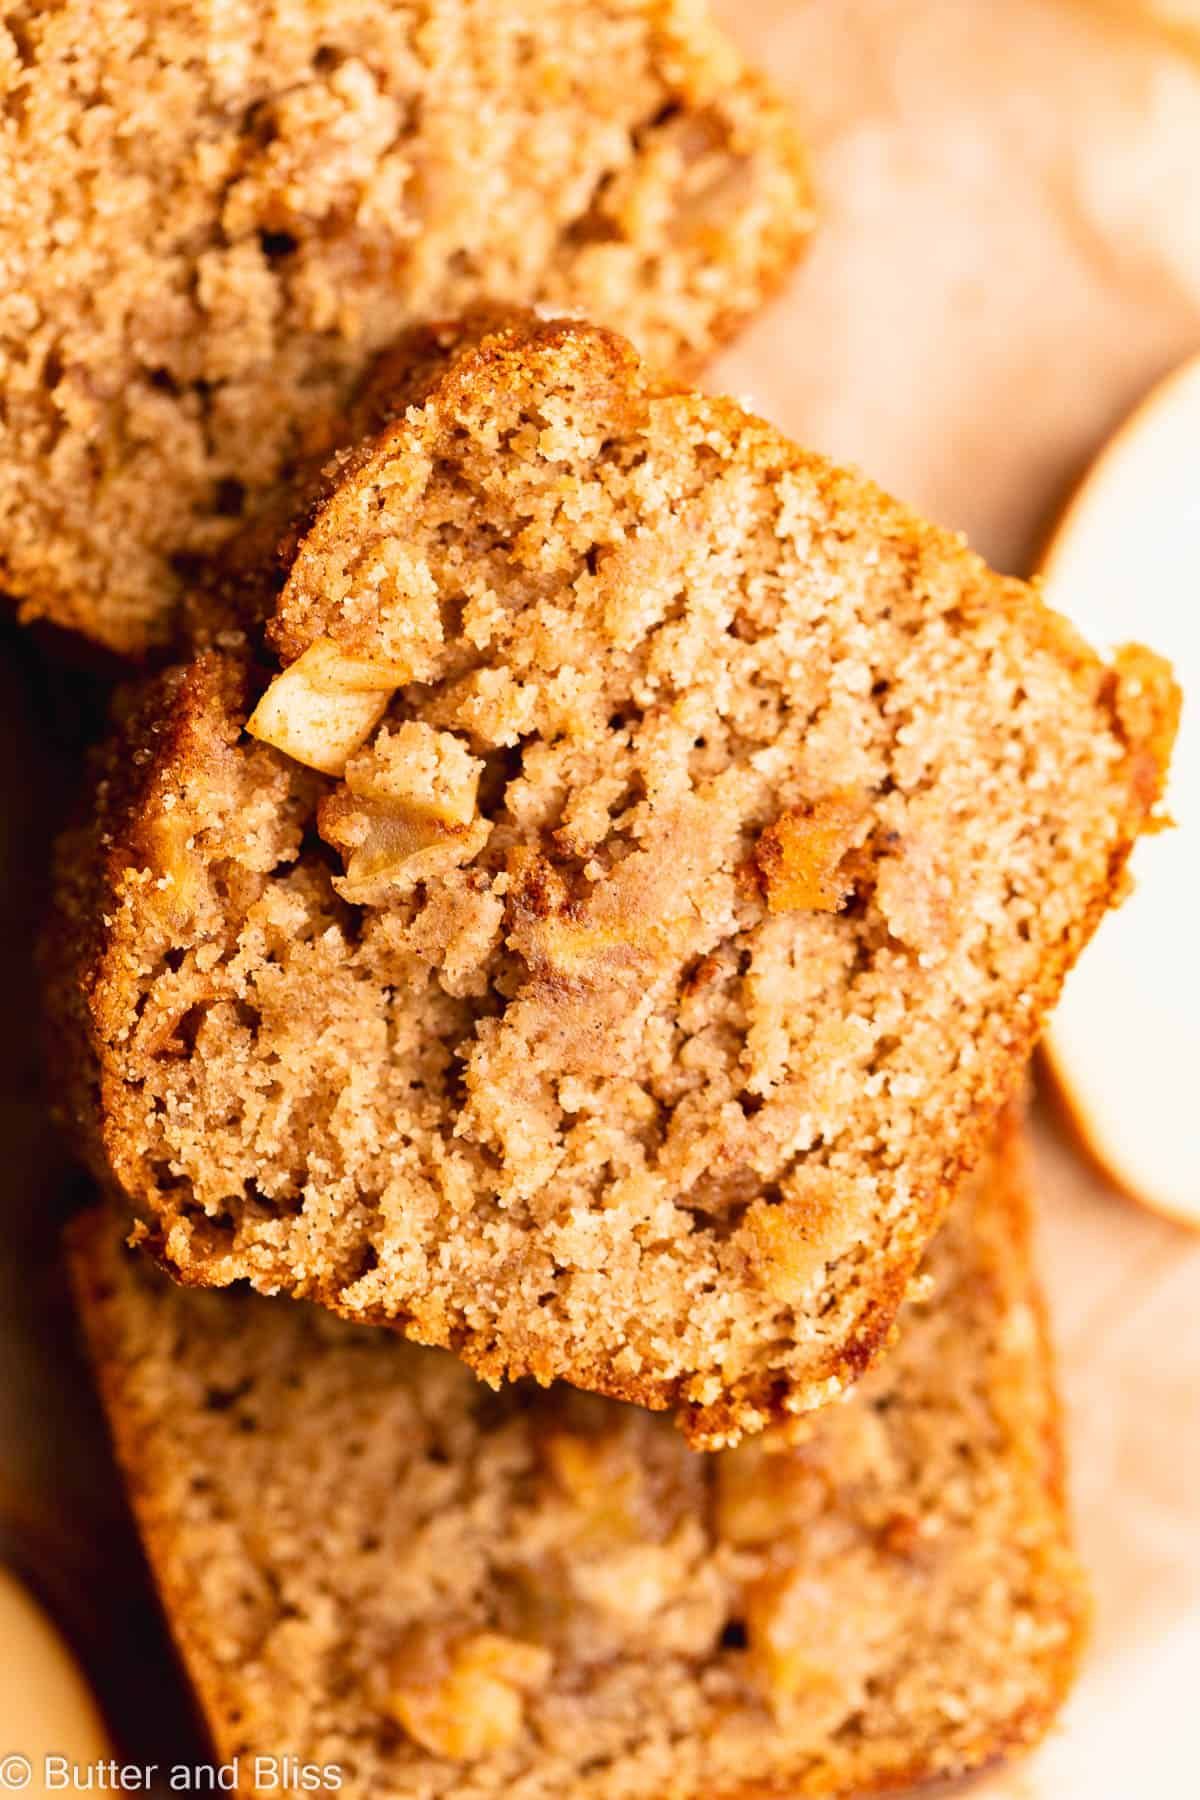 Slices of apple spice gluten free bread stacked on top of each other bursting with apples.